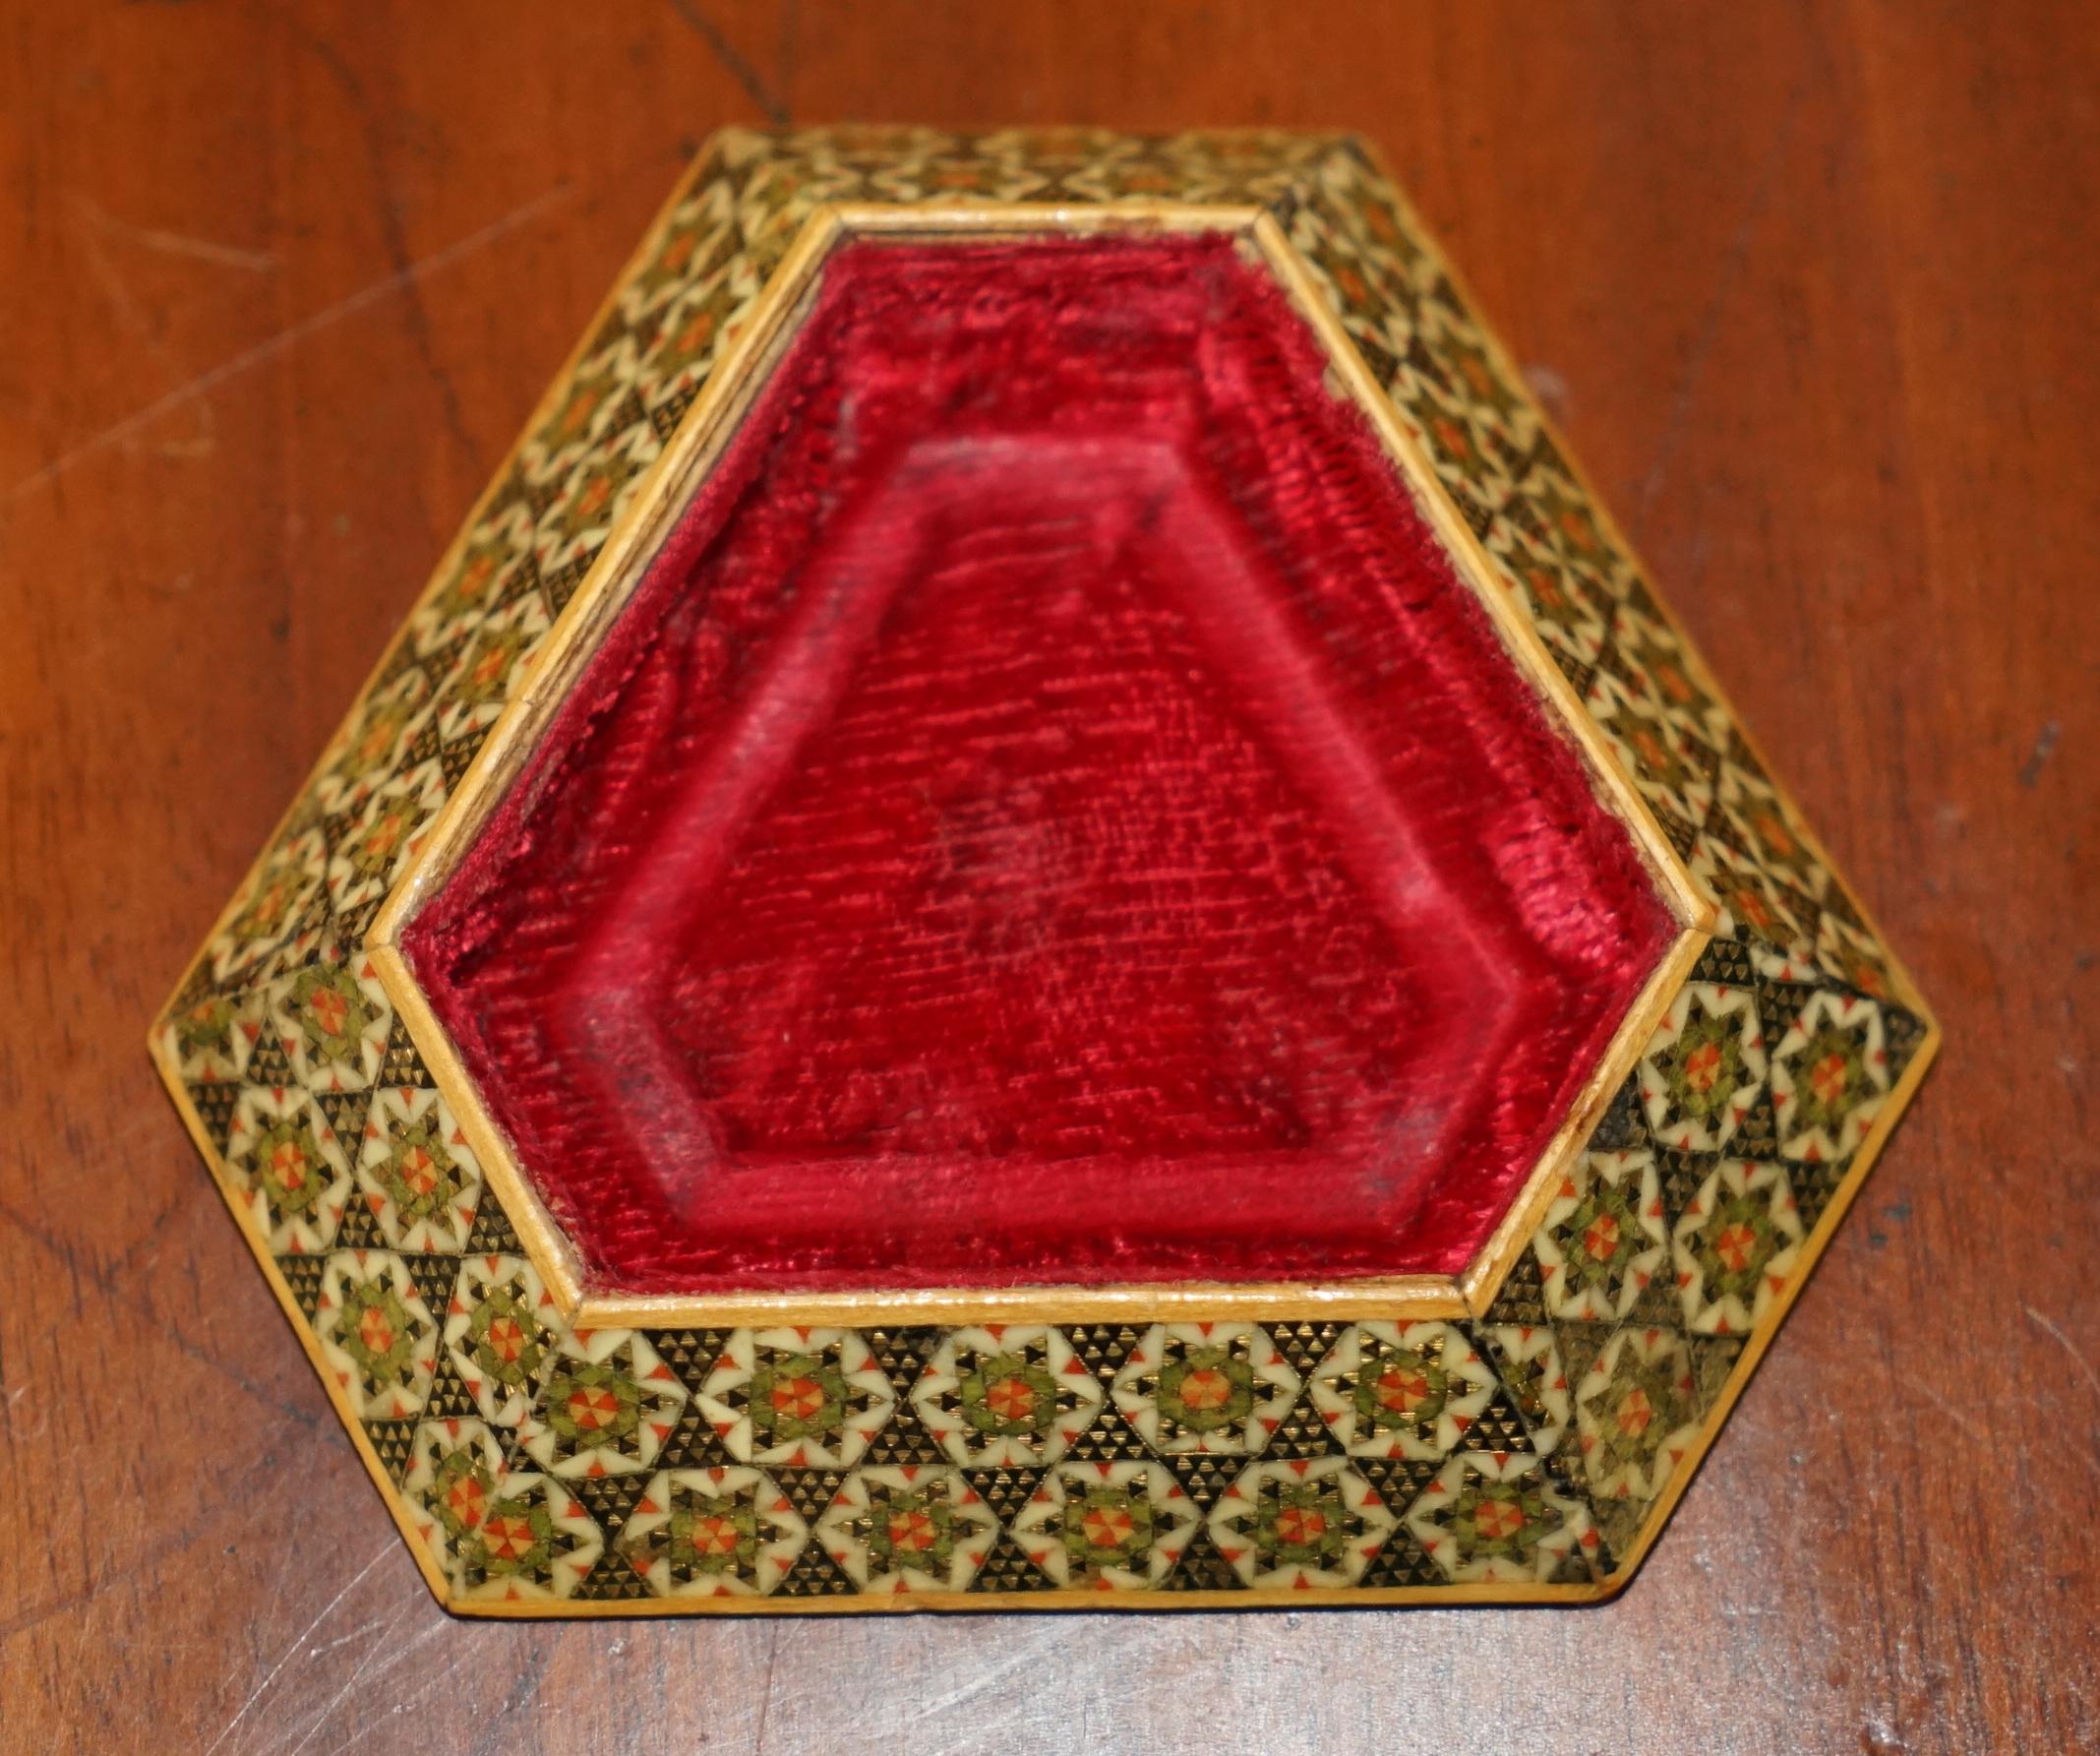 ANTIQUE PERSIAN ASHTRAY WiTH CRANBERRY GLASS TRIANGLE INTERNAL TRAY (Glas) im Angebot